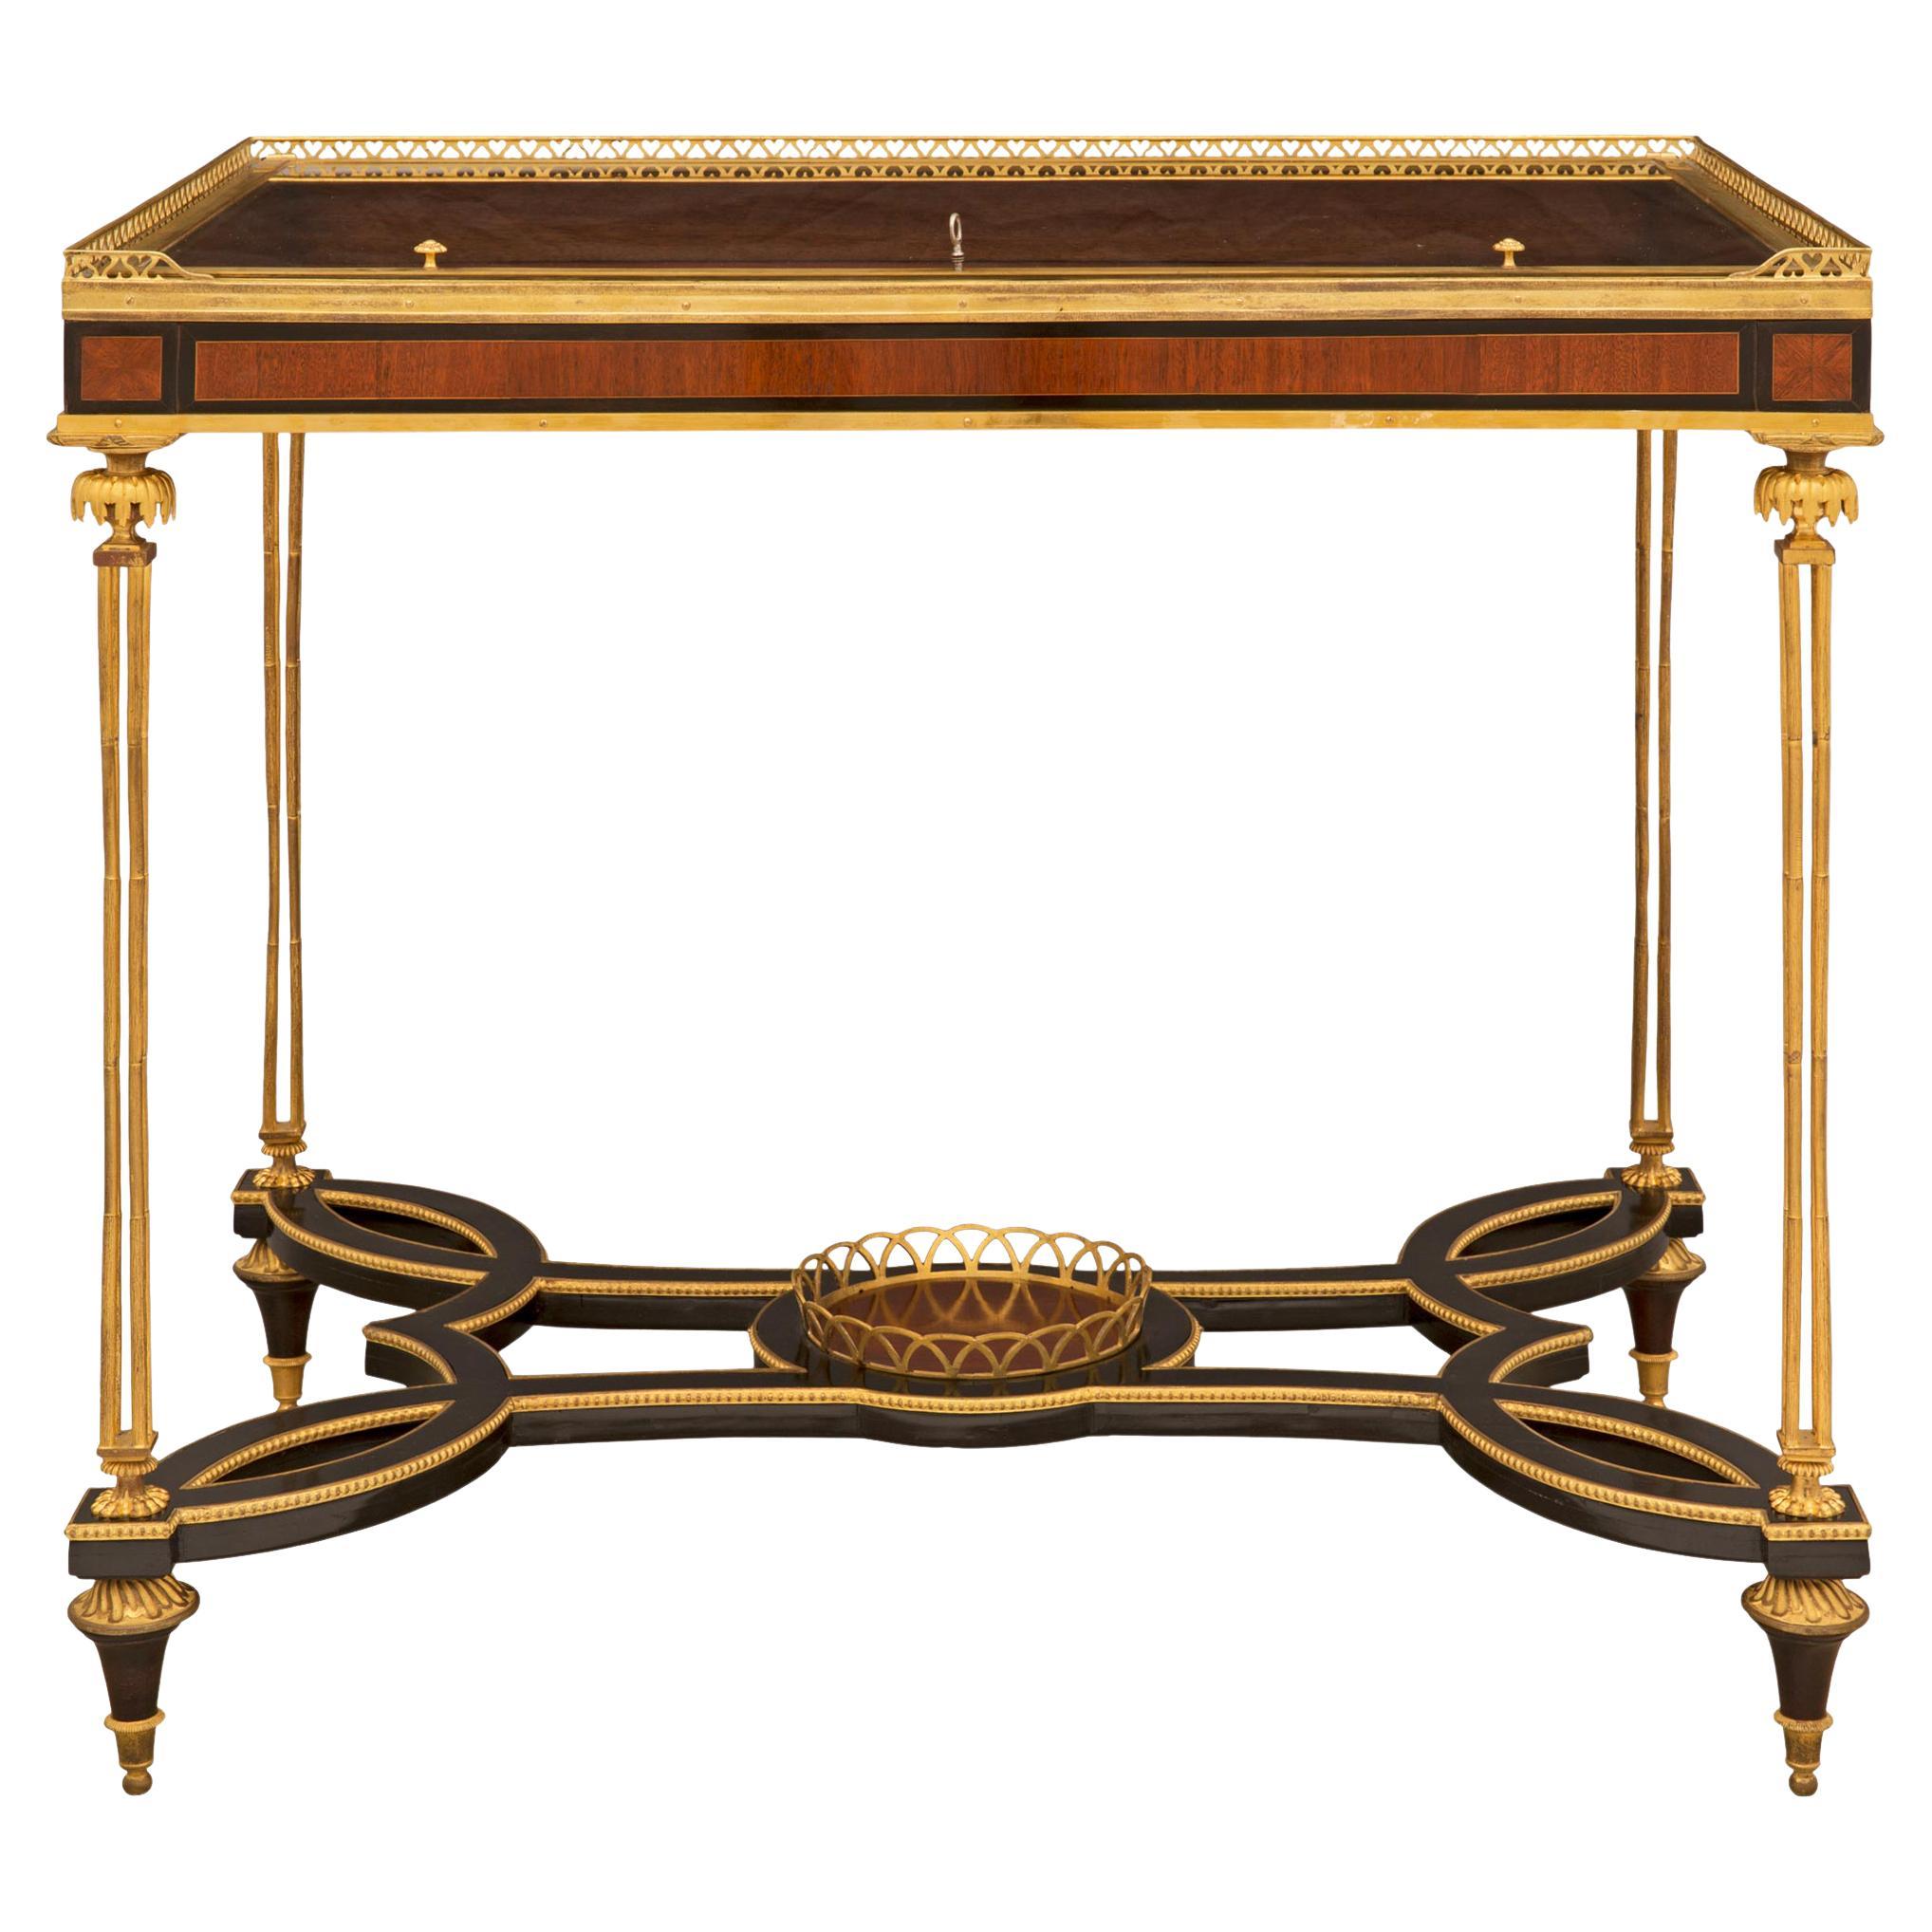 French Mid-19th Century Louis XVI Style Kingwood and Ormolu Display Table